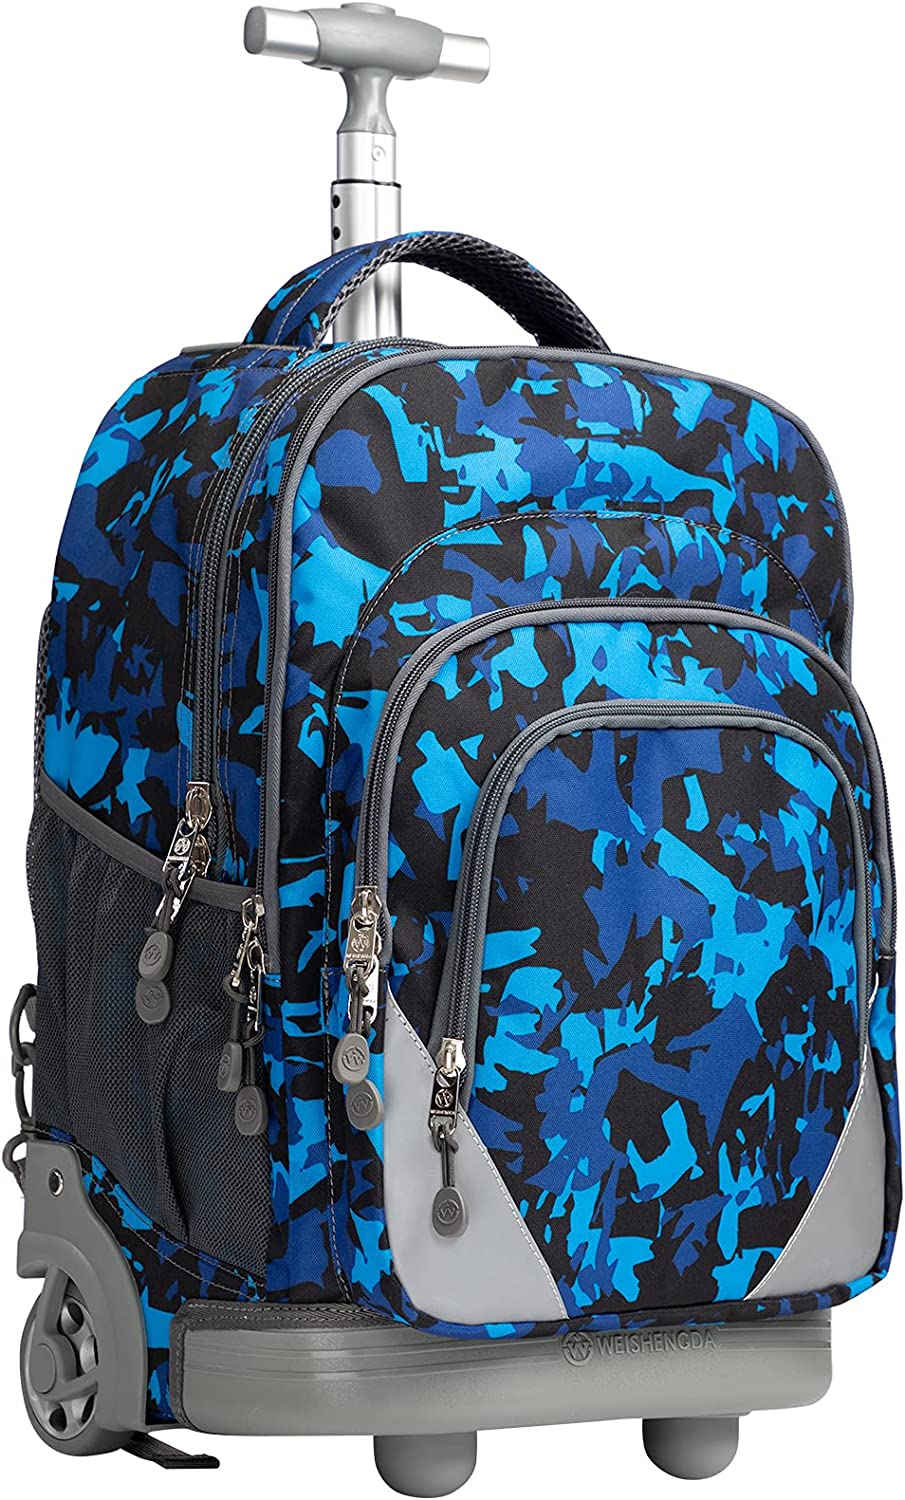 WEISHENGDA 18 inches Wheeled Rolling Backpack for Adults and School Students Short Trip Books Laptop Trolley Bags, Blue Camo